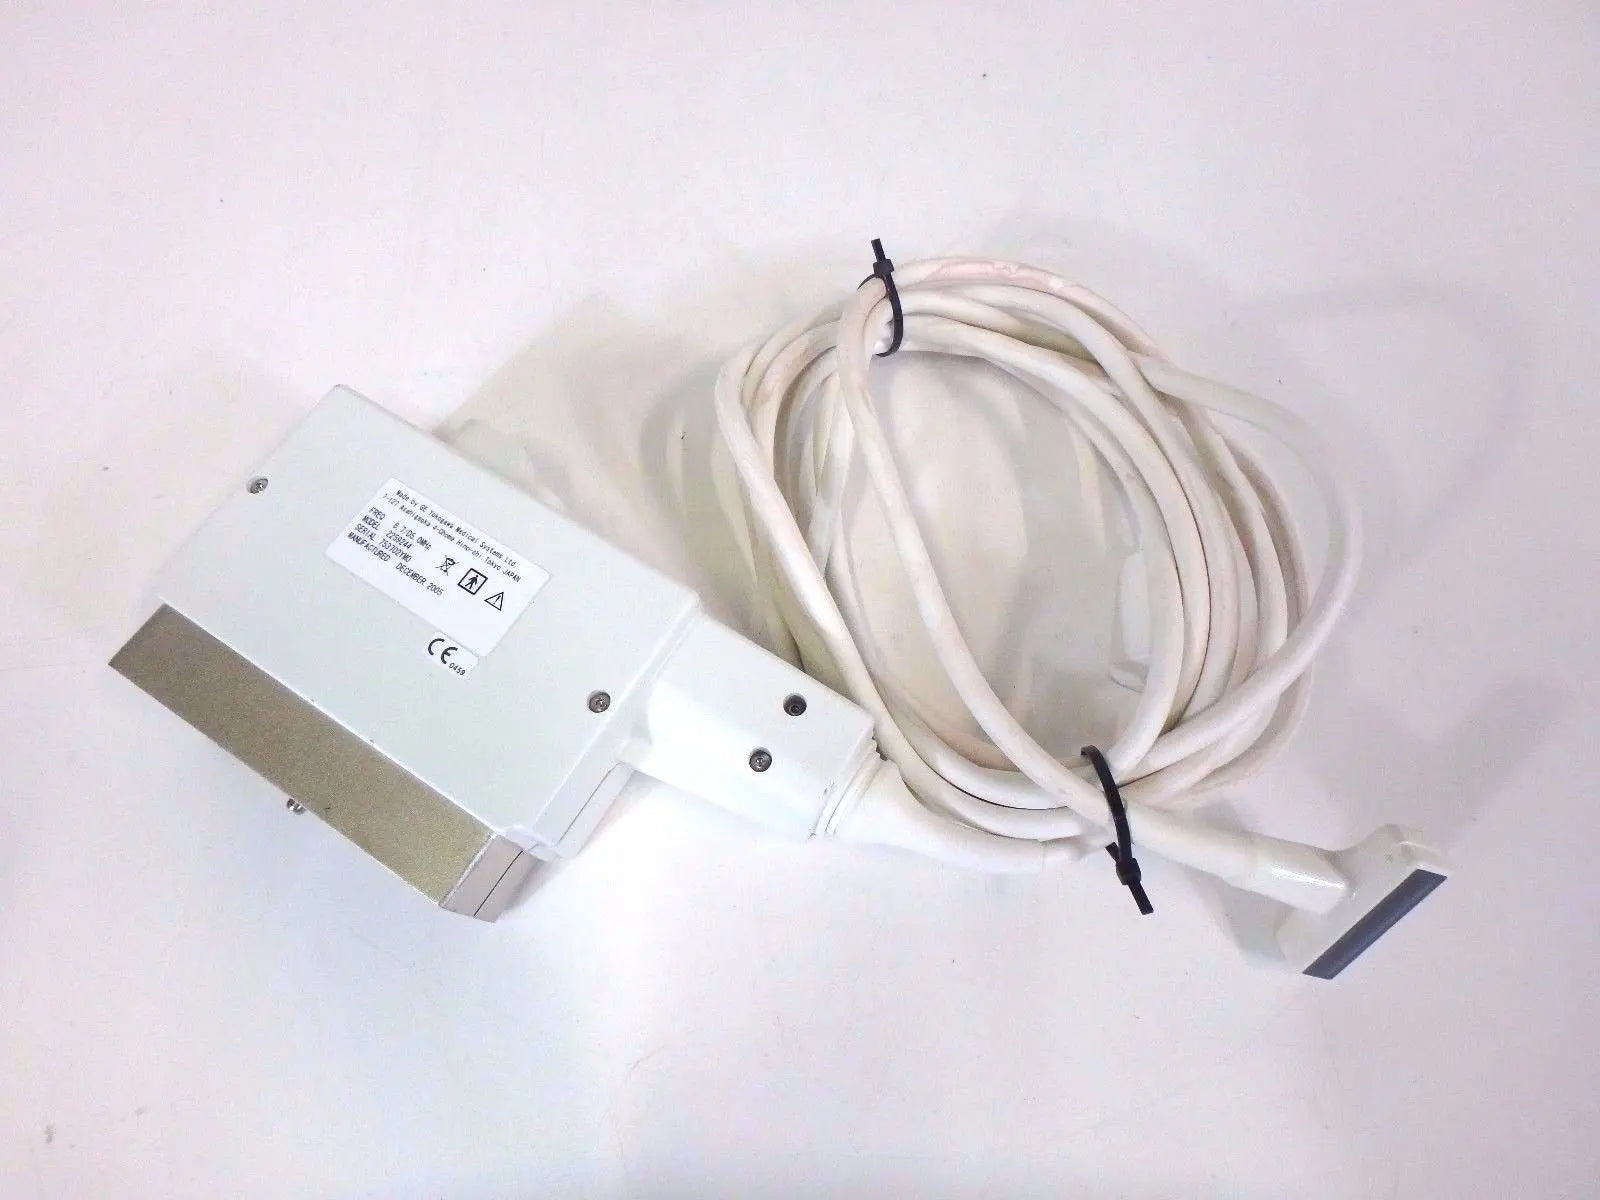 GE T739 Intraoperative 6.7/D5 0MHz Ultrasound Transducer Probe 2259244 Medical